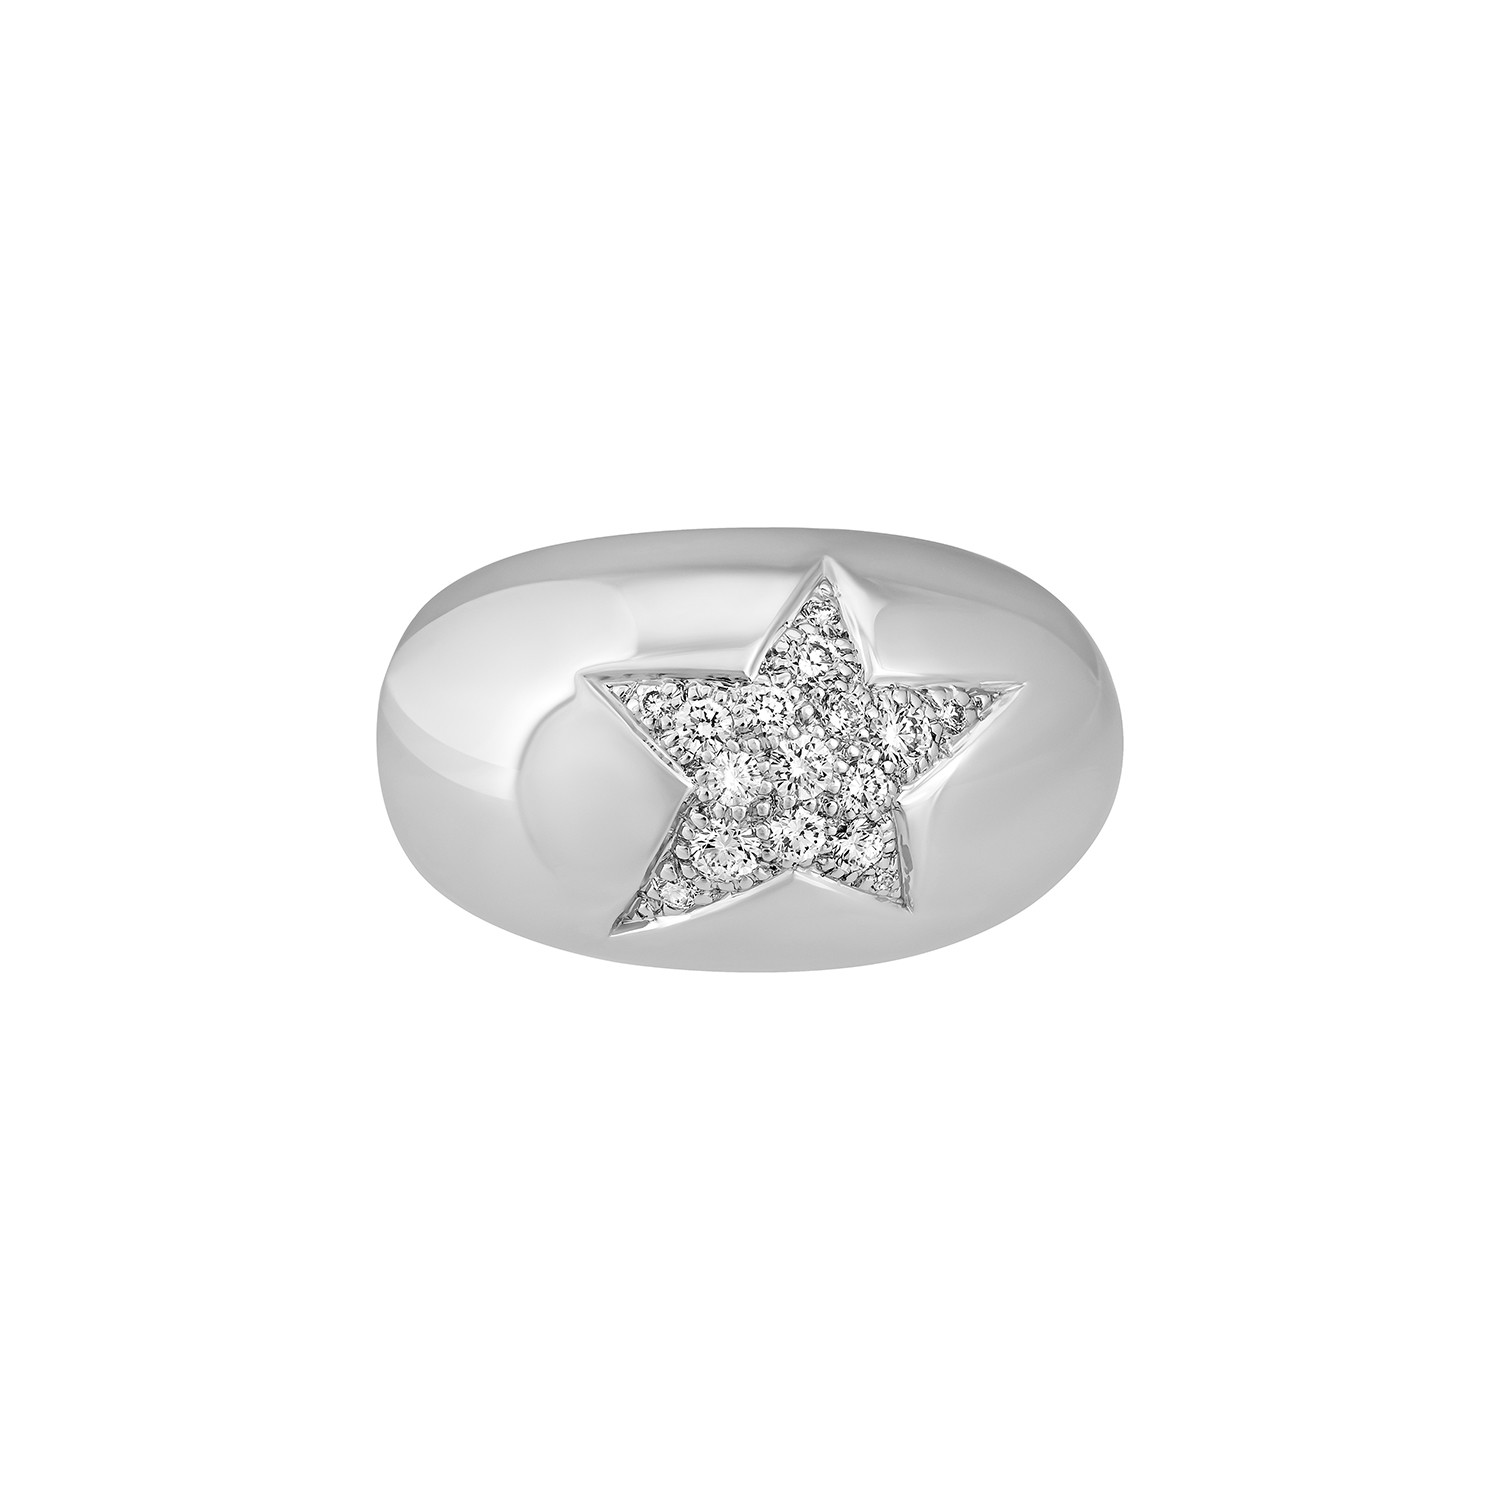 Authentic! Chanel Comete 18K Yellow Gold Star Diamond Cocktail Ring